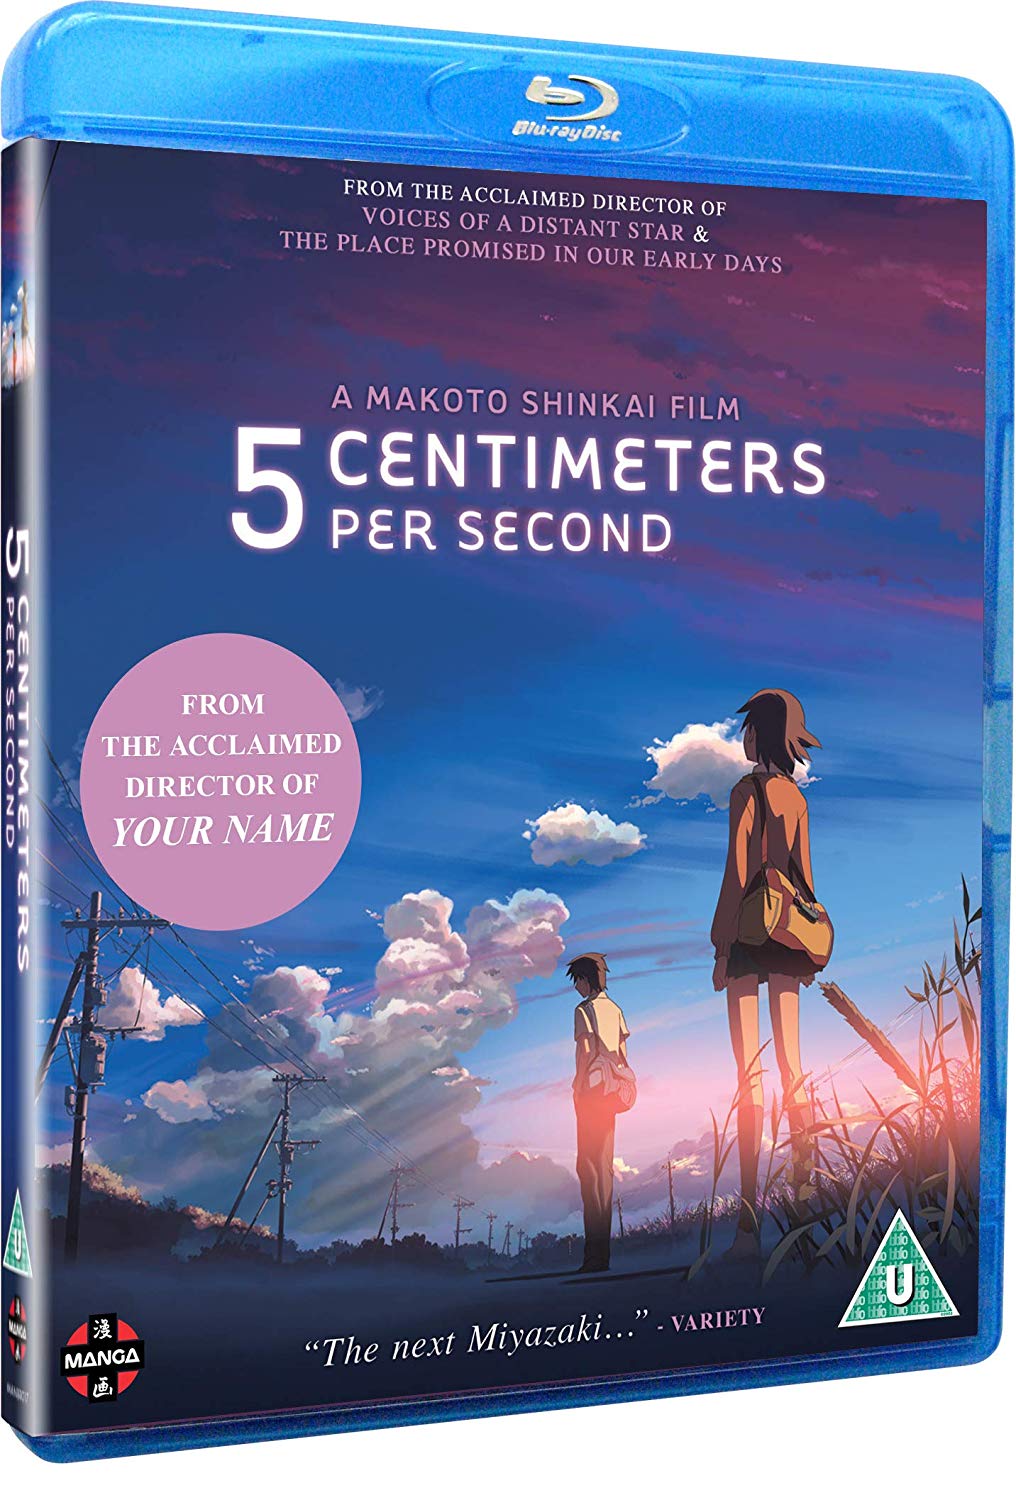 5 centimeters per second by STXFF34 on DeviantArt